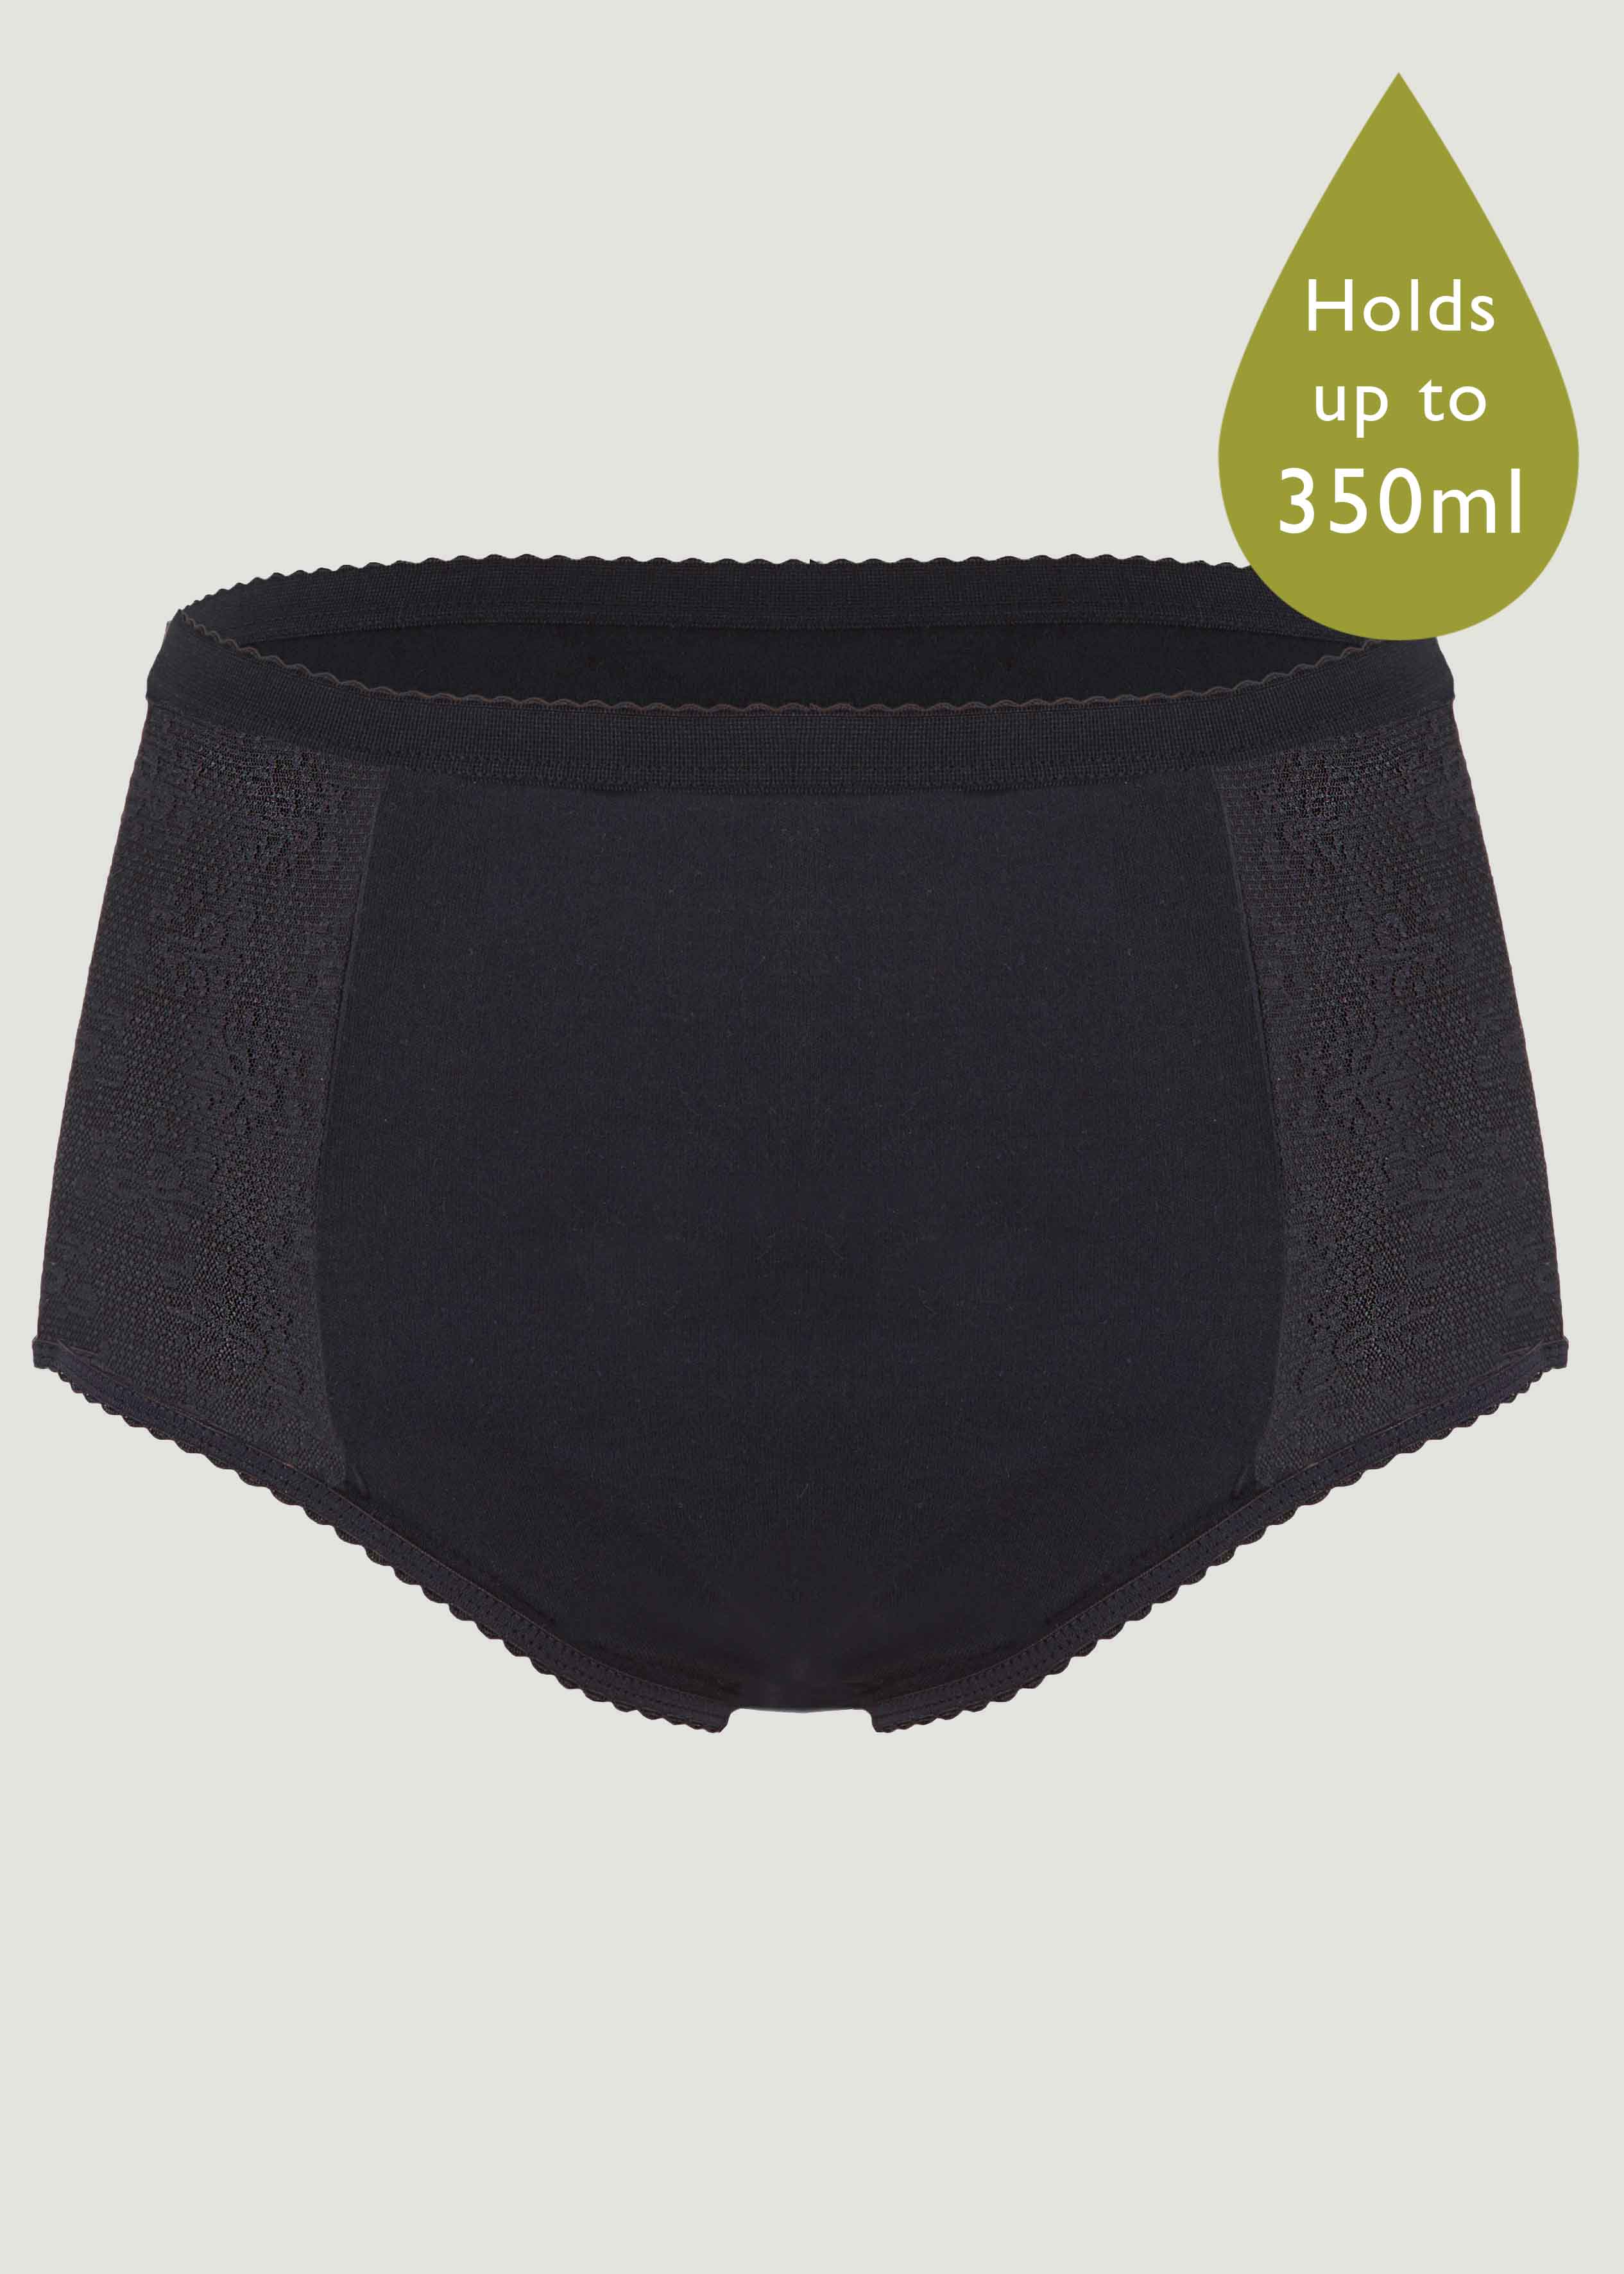 Absorbent Full Brief Knickers, Black, Incontinence Underwear, Washable  Knickers